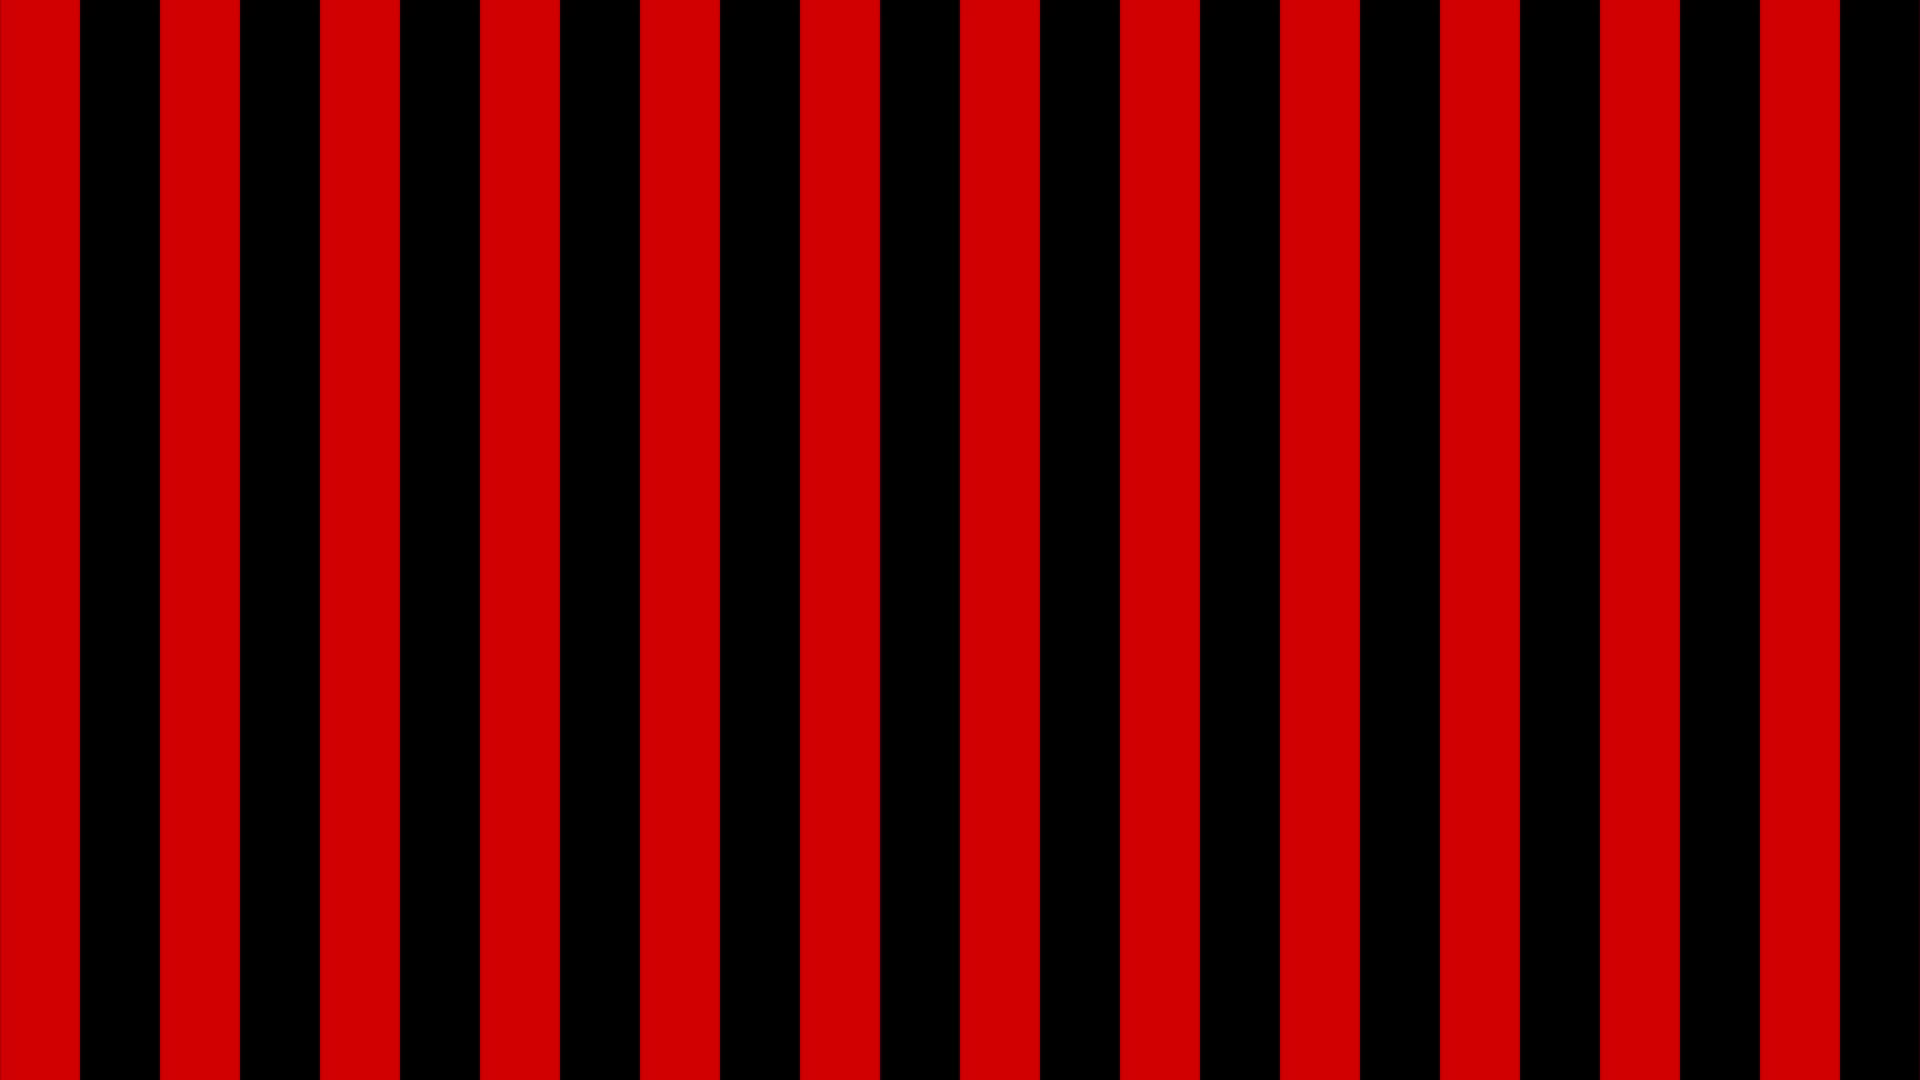 Red & Black Lines – Basic Animation Loop — Free Stock Footage Archive